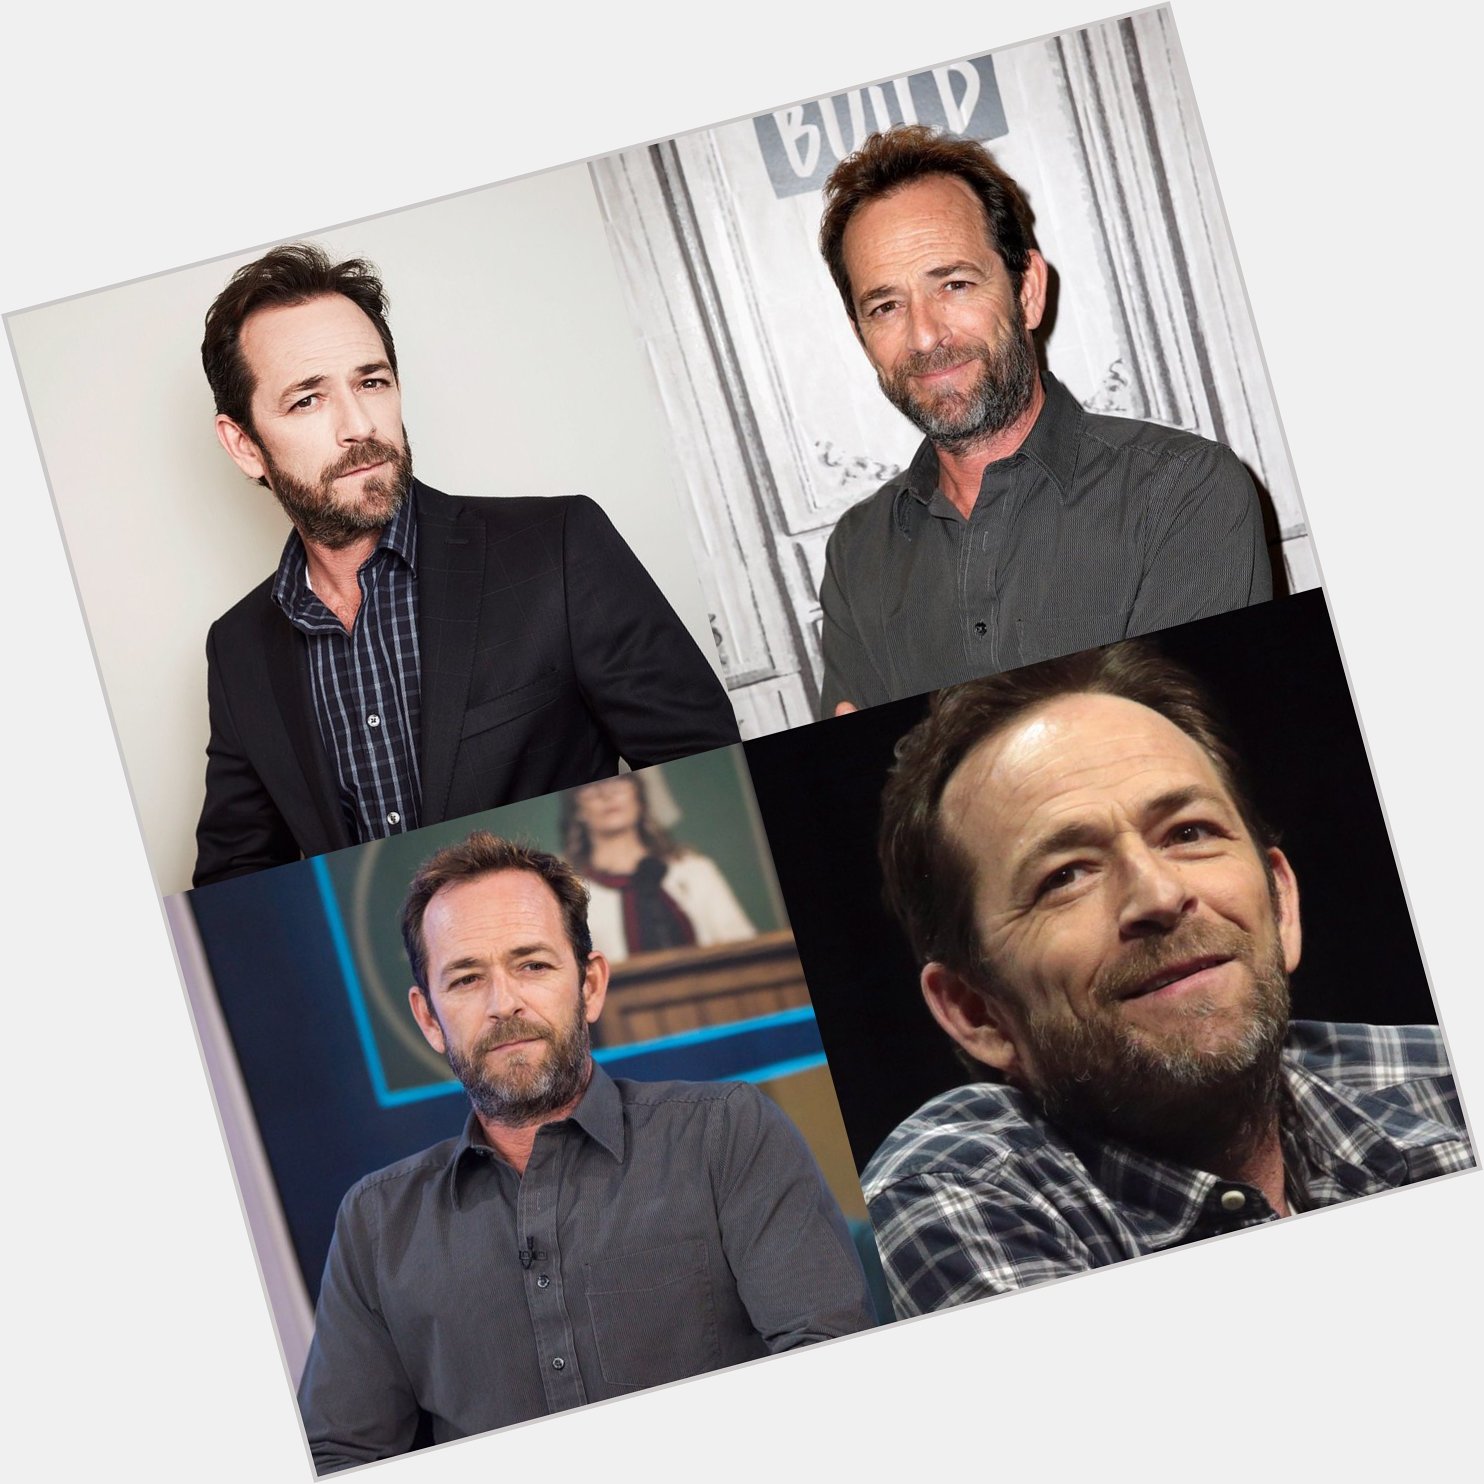 Happy 54 birthday to Luke Perry  up in heaven. May he Rest In Peace.  